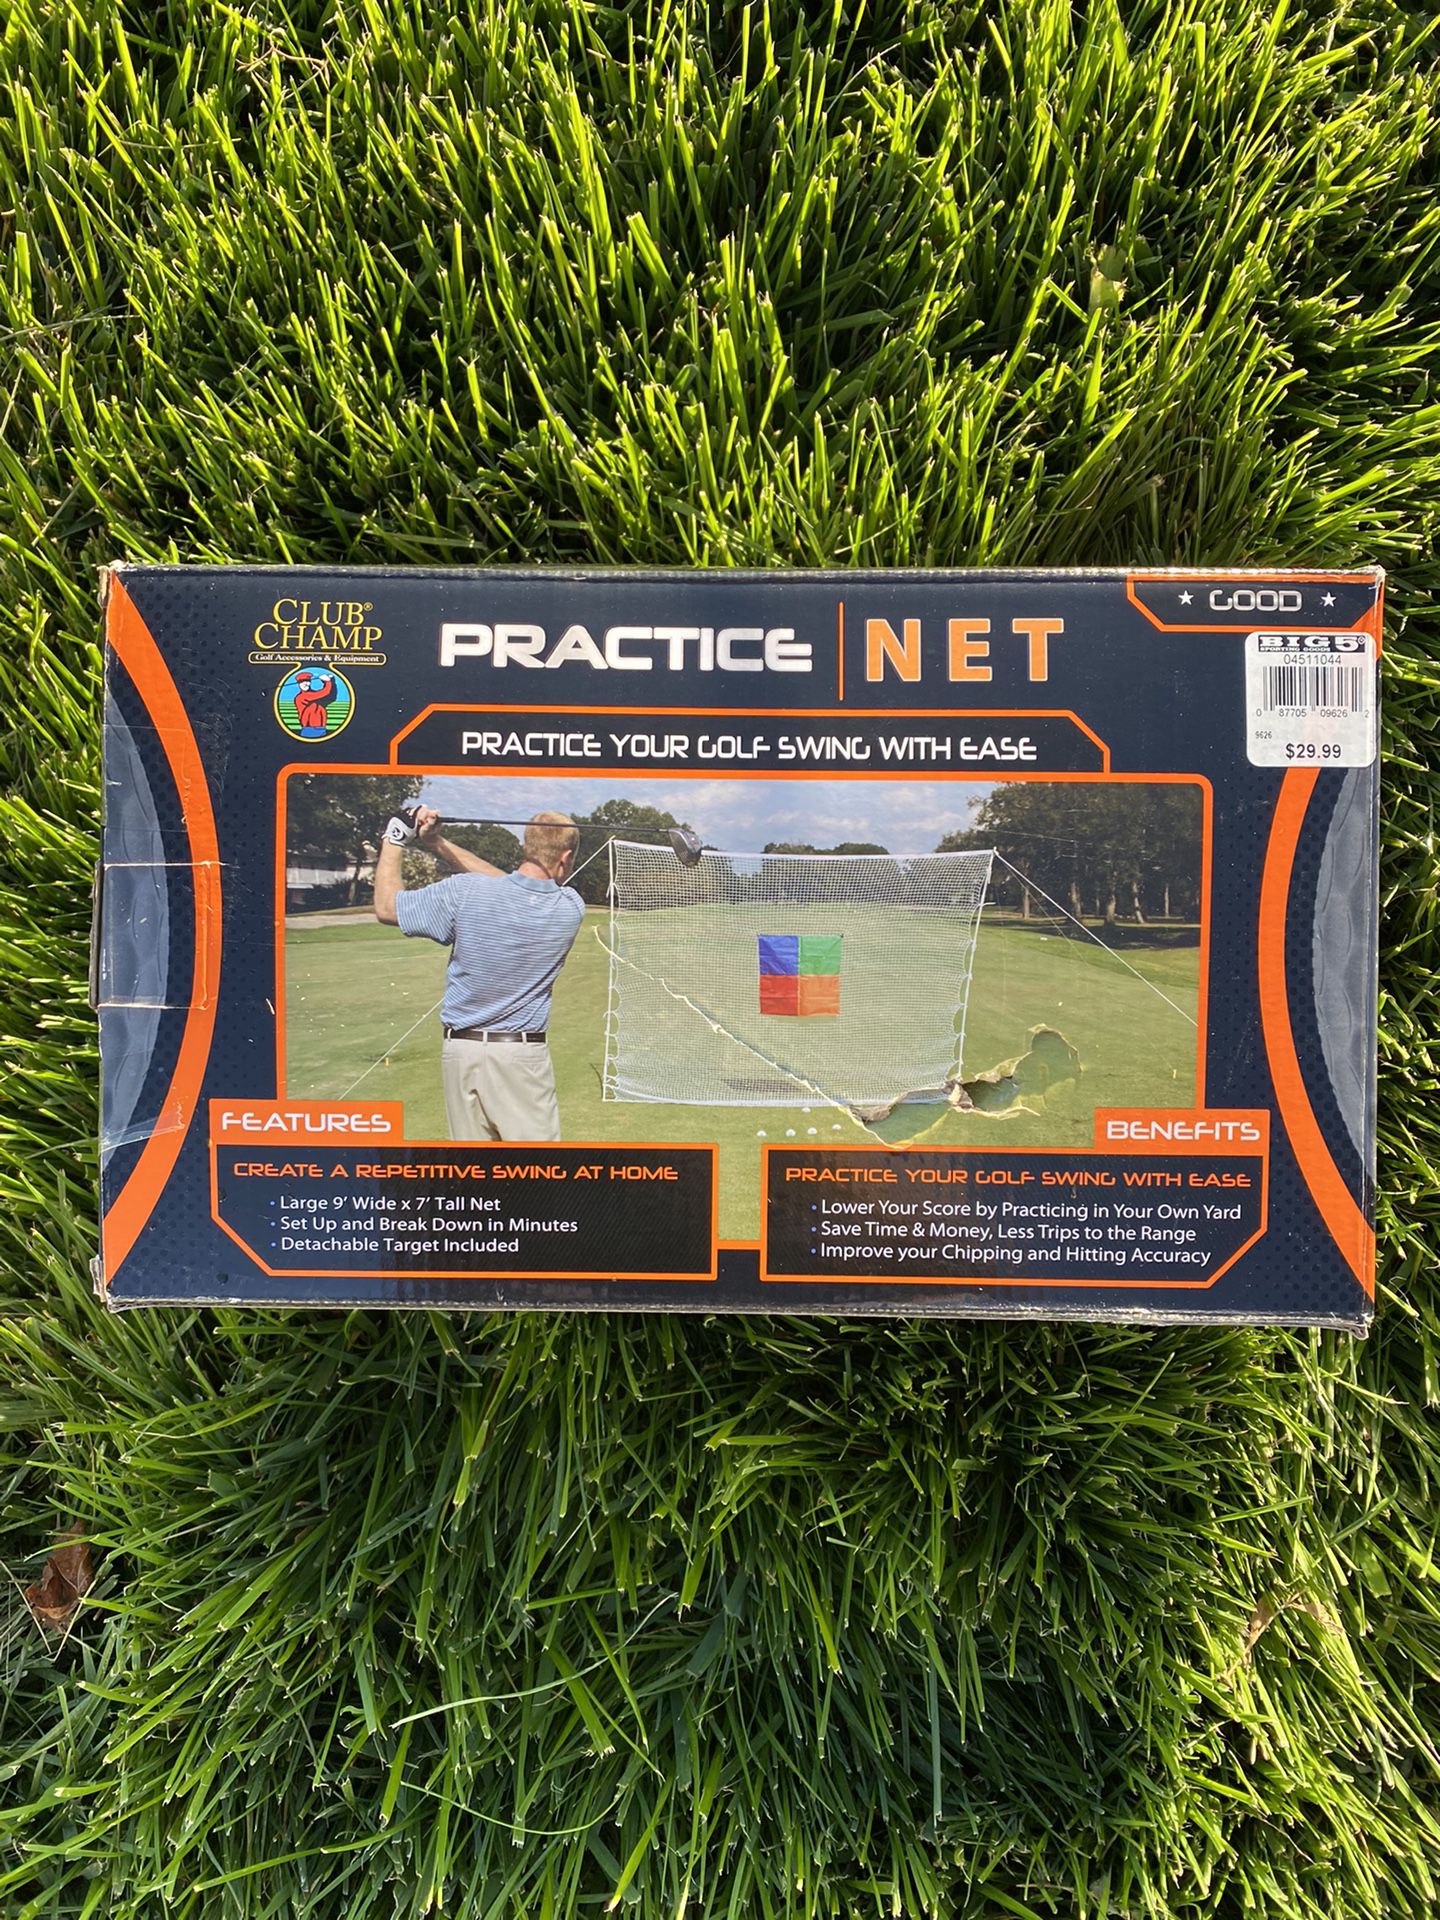 Christmas Gifts Presents Club champ practice net golf swing